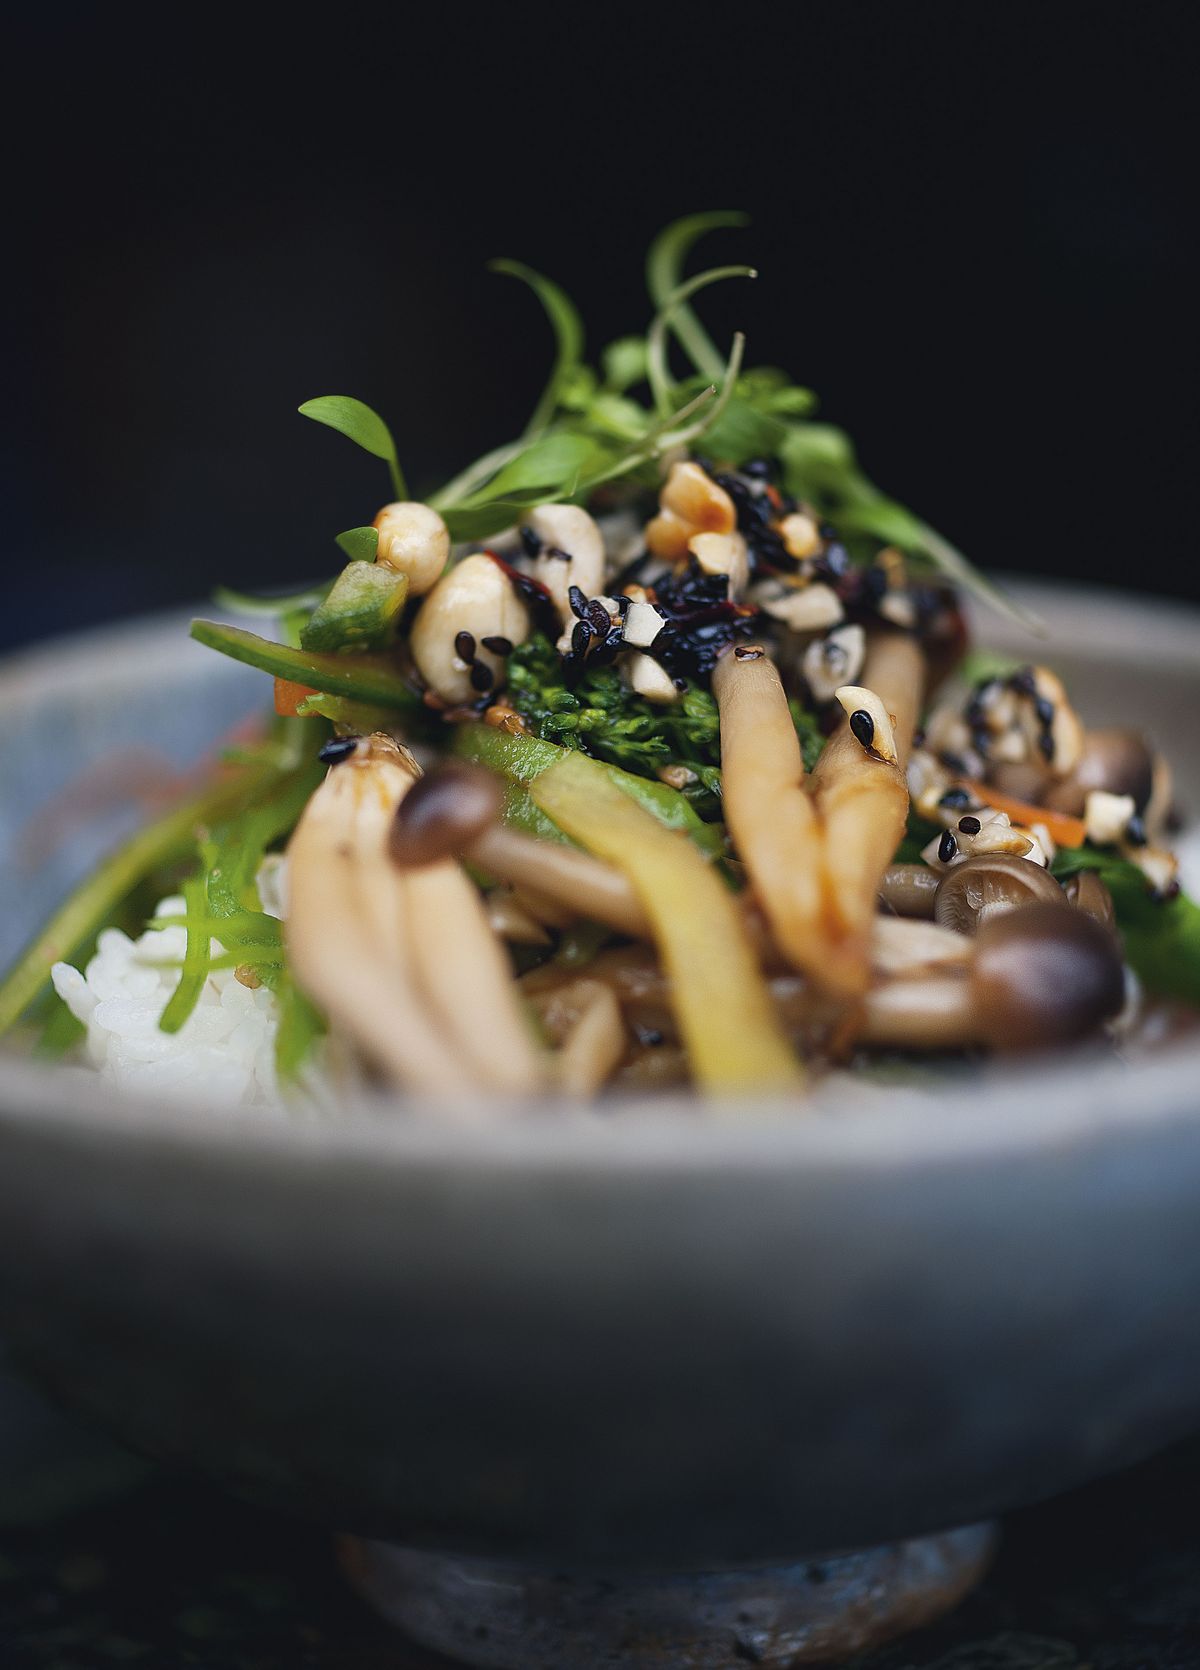 Yotam Ottolenghi’s Miso Vegetables and Rice with Black Sesame Dressing